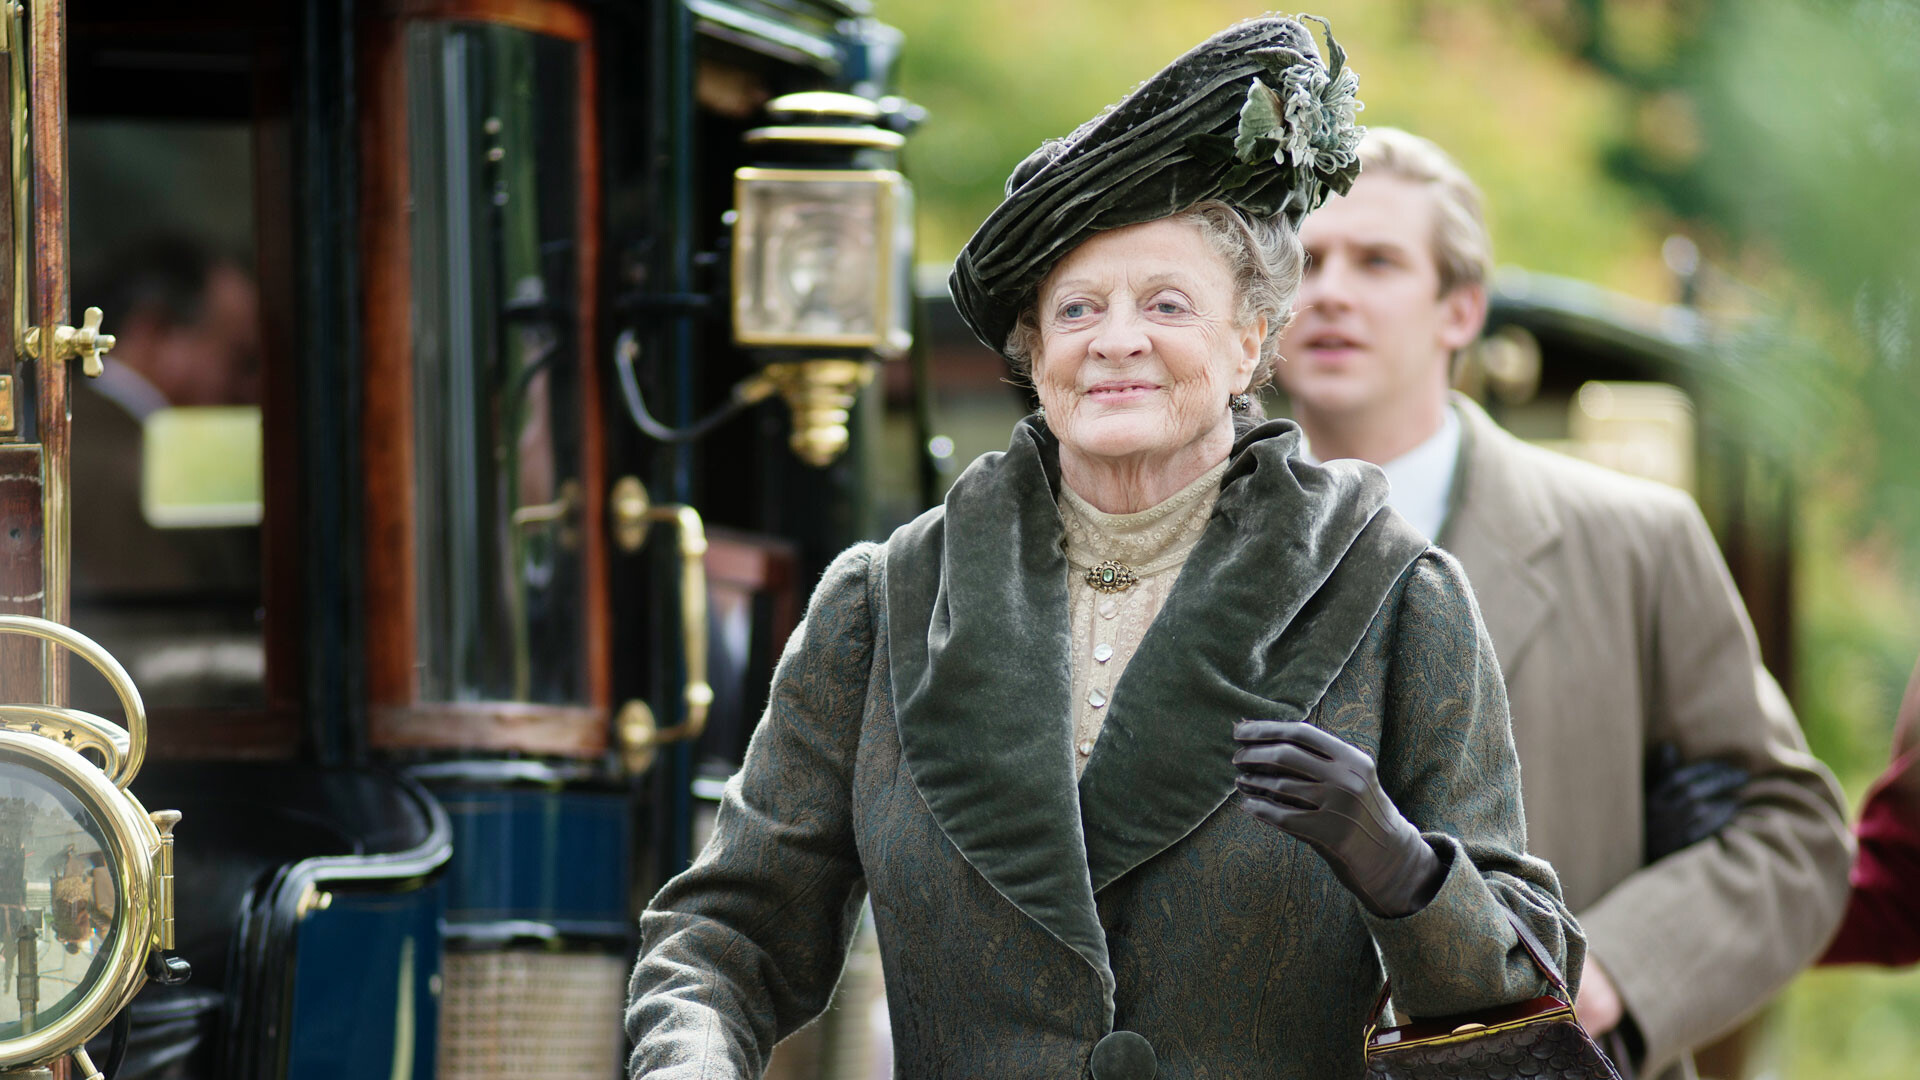 Downton Abbey: Violet Crawley, the matriarch of the Crawley Family by her marriage to the late Earl of Grantham. 1920x1080 Full HD Wallpaper.